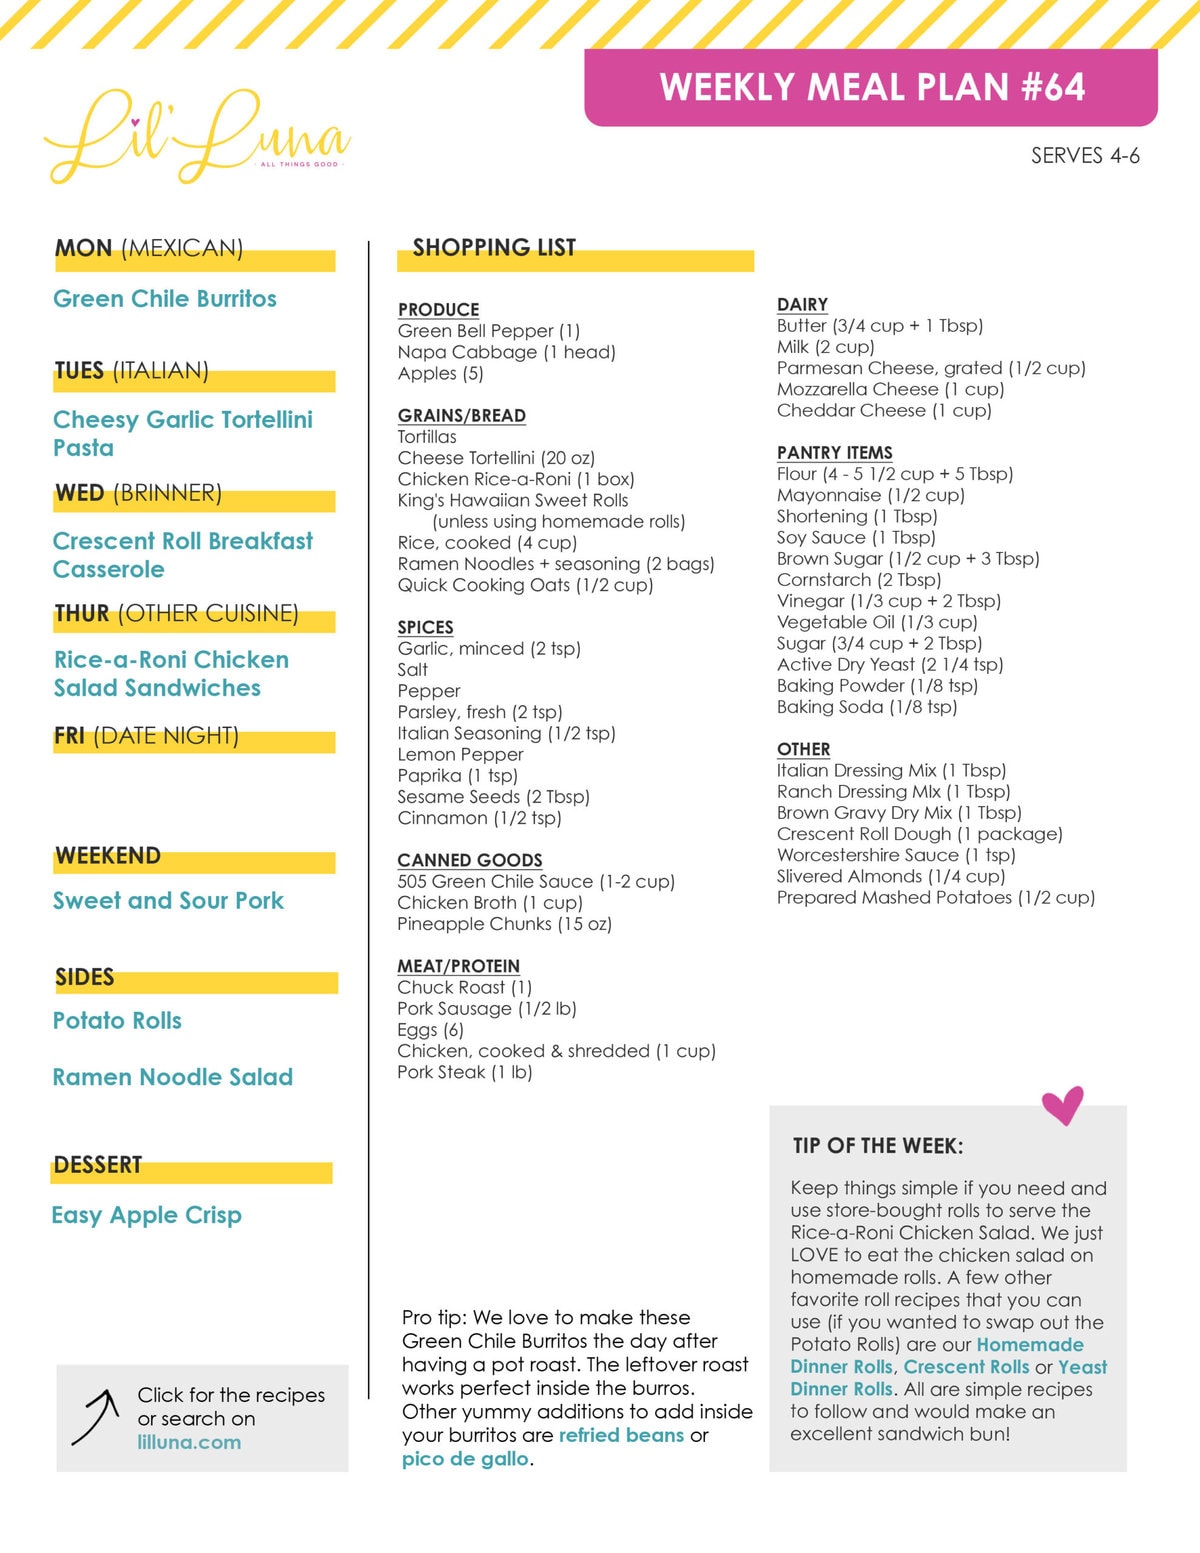 Printable version of Meal Plan #64 with grocery list.